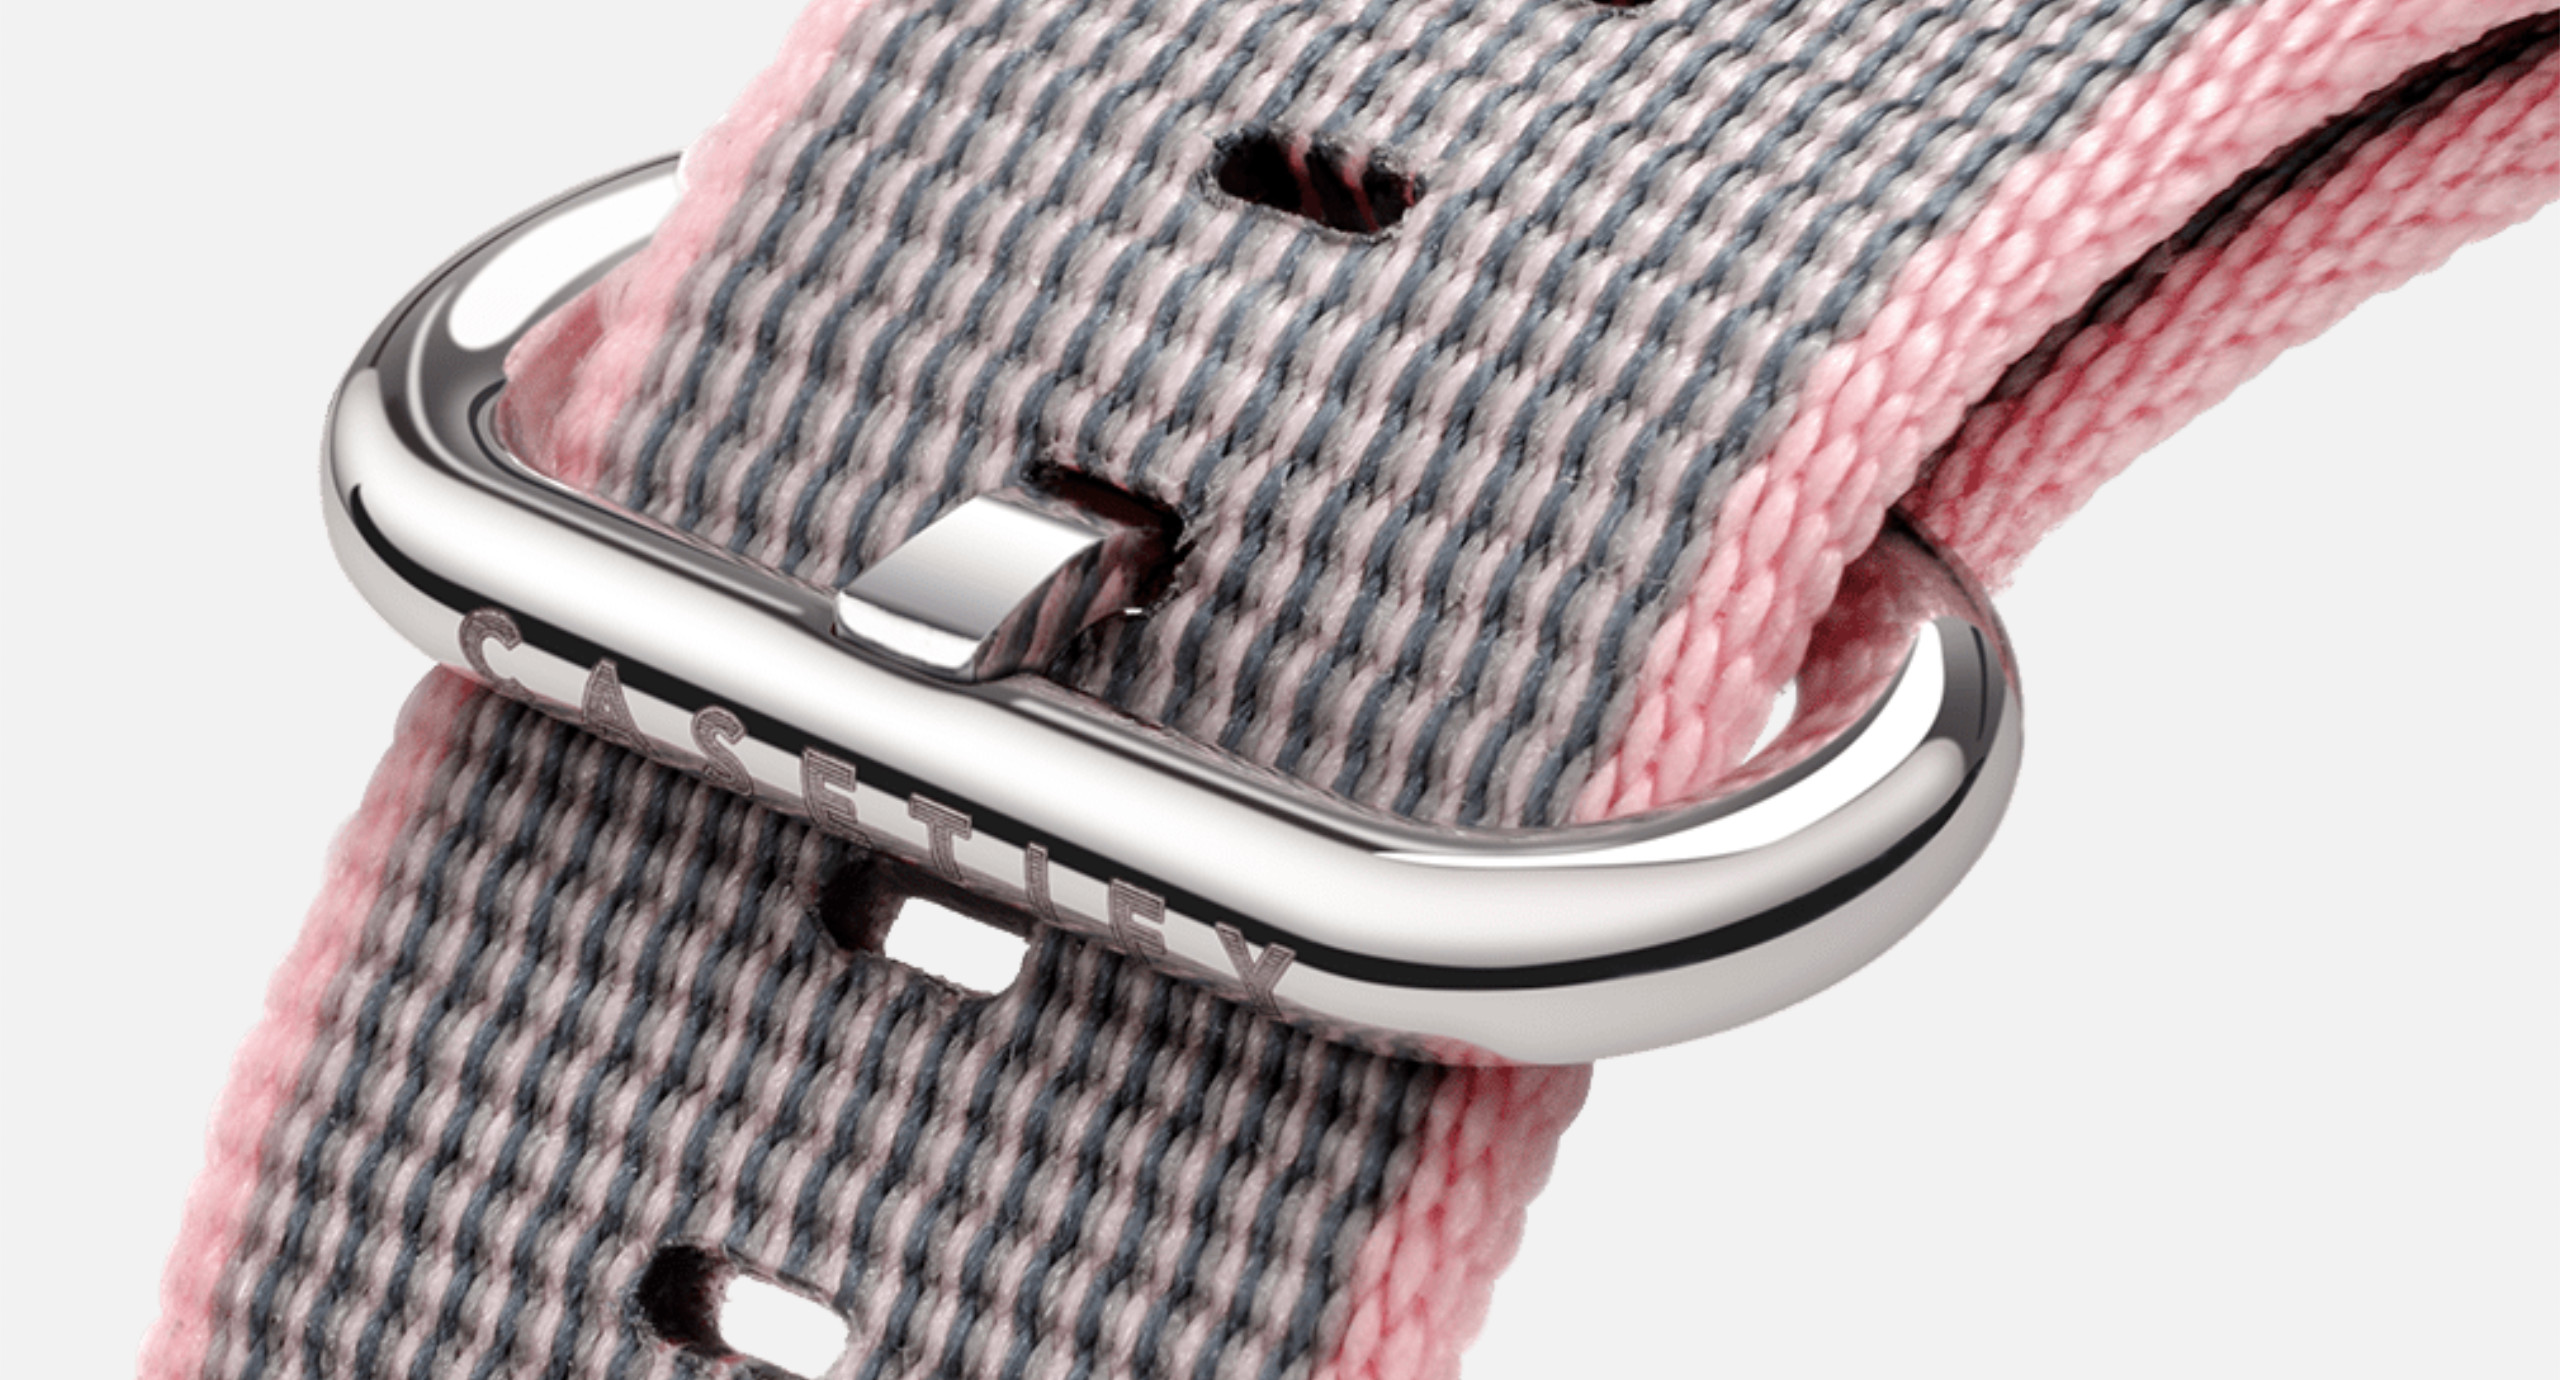 The stainless steel connector and buckle allow you to easily switch out Apple Watch bands and adjust the fit.